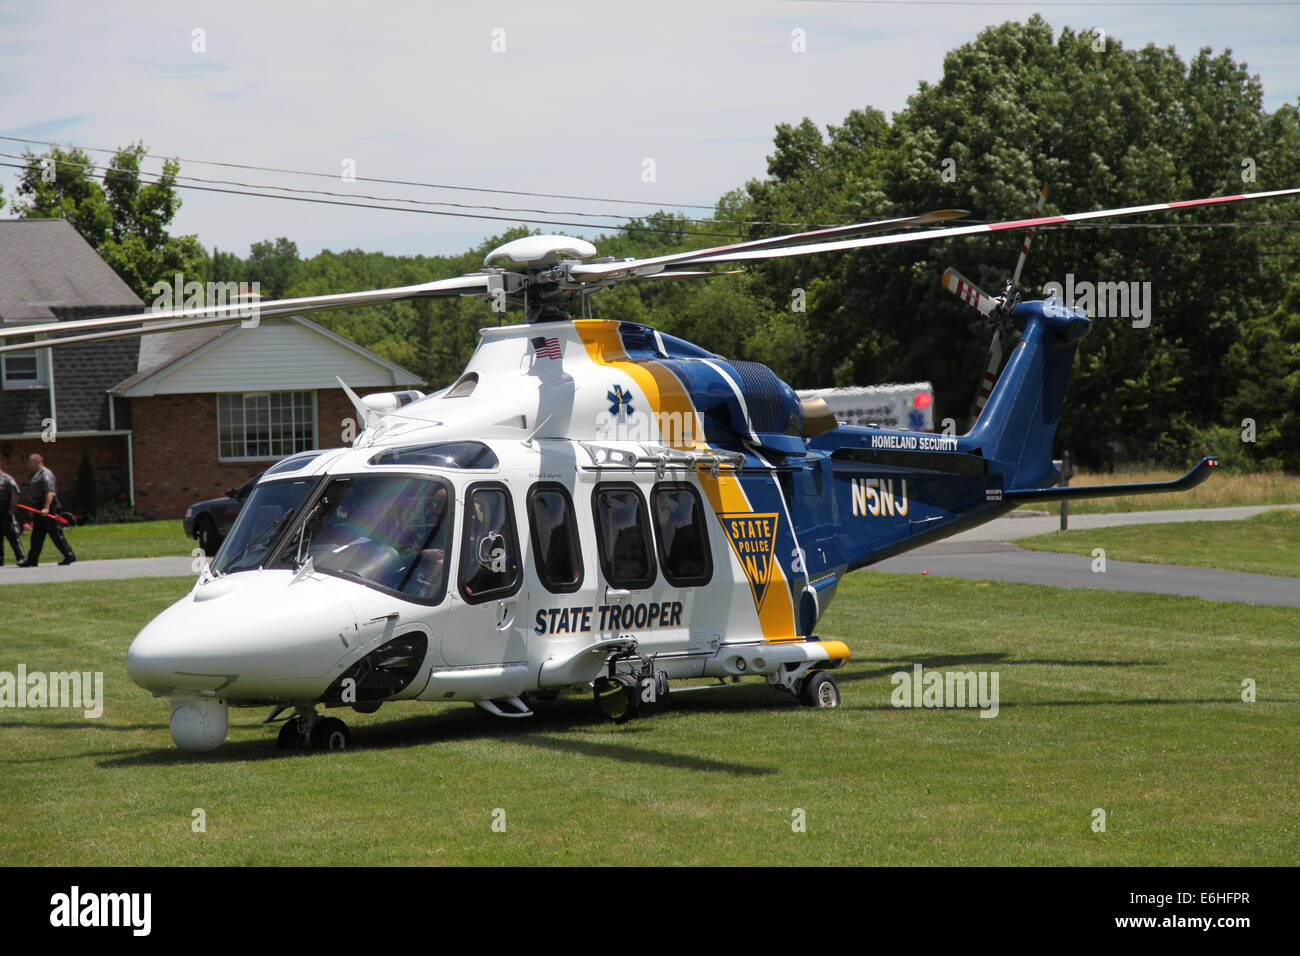 New Jersey State Police Medical Evacuation Helicopter arrives to airlift a  motorcyclist to hospital after accident Stock Photo - Alamy